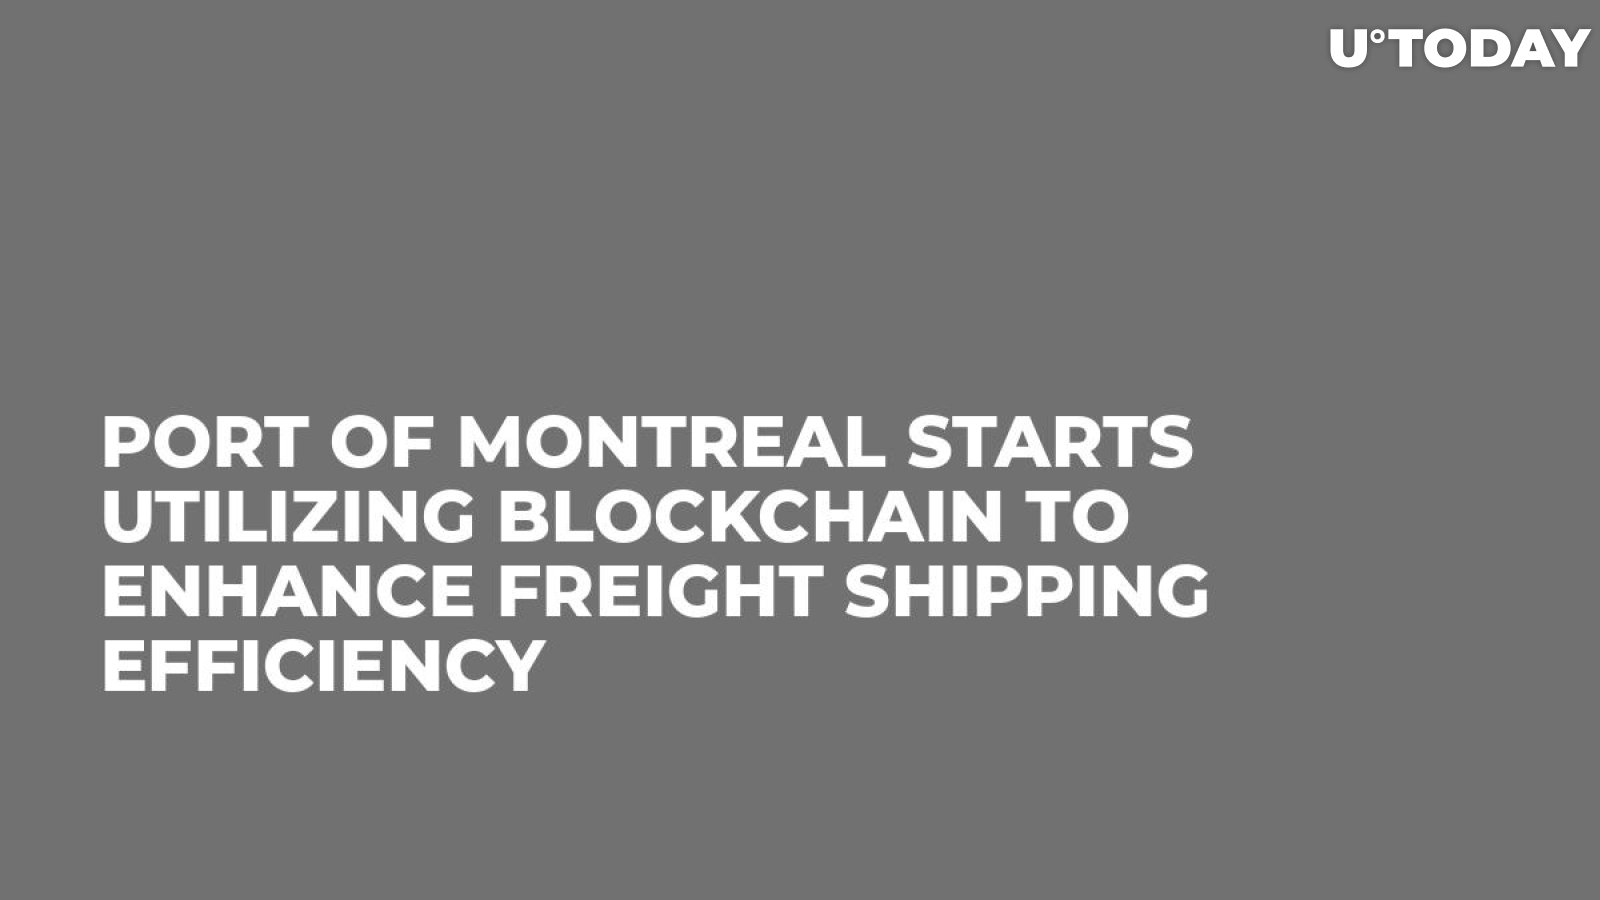 Port of Montreal Starts Utilizing Blockchain to Enhance Freight Shipping Efficiency 